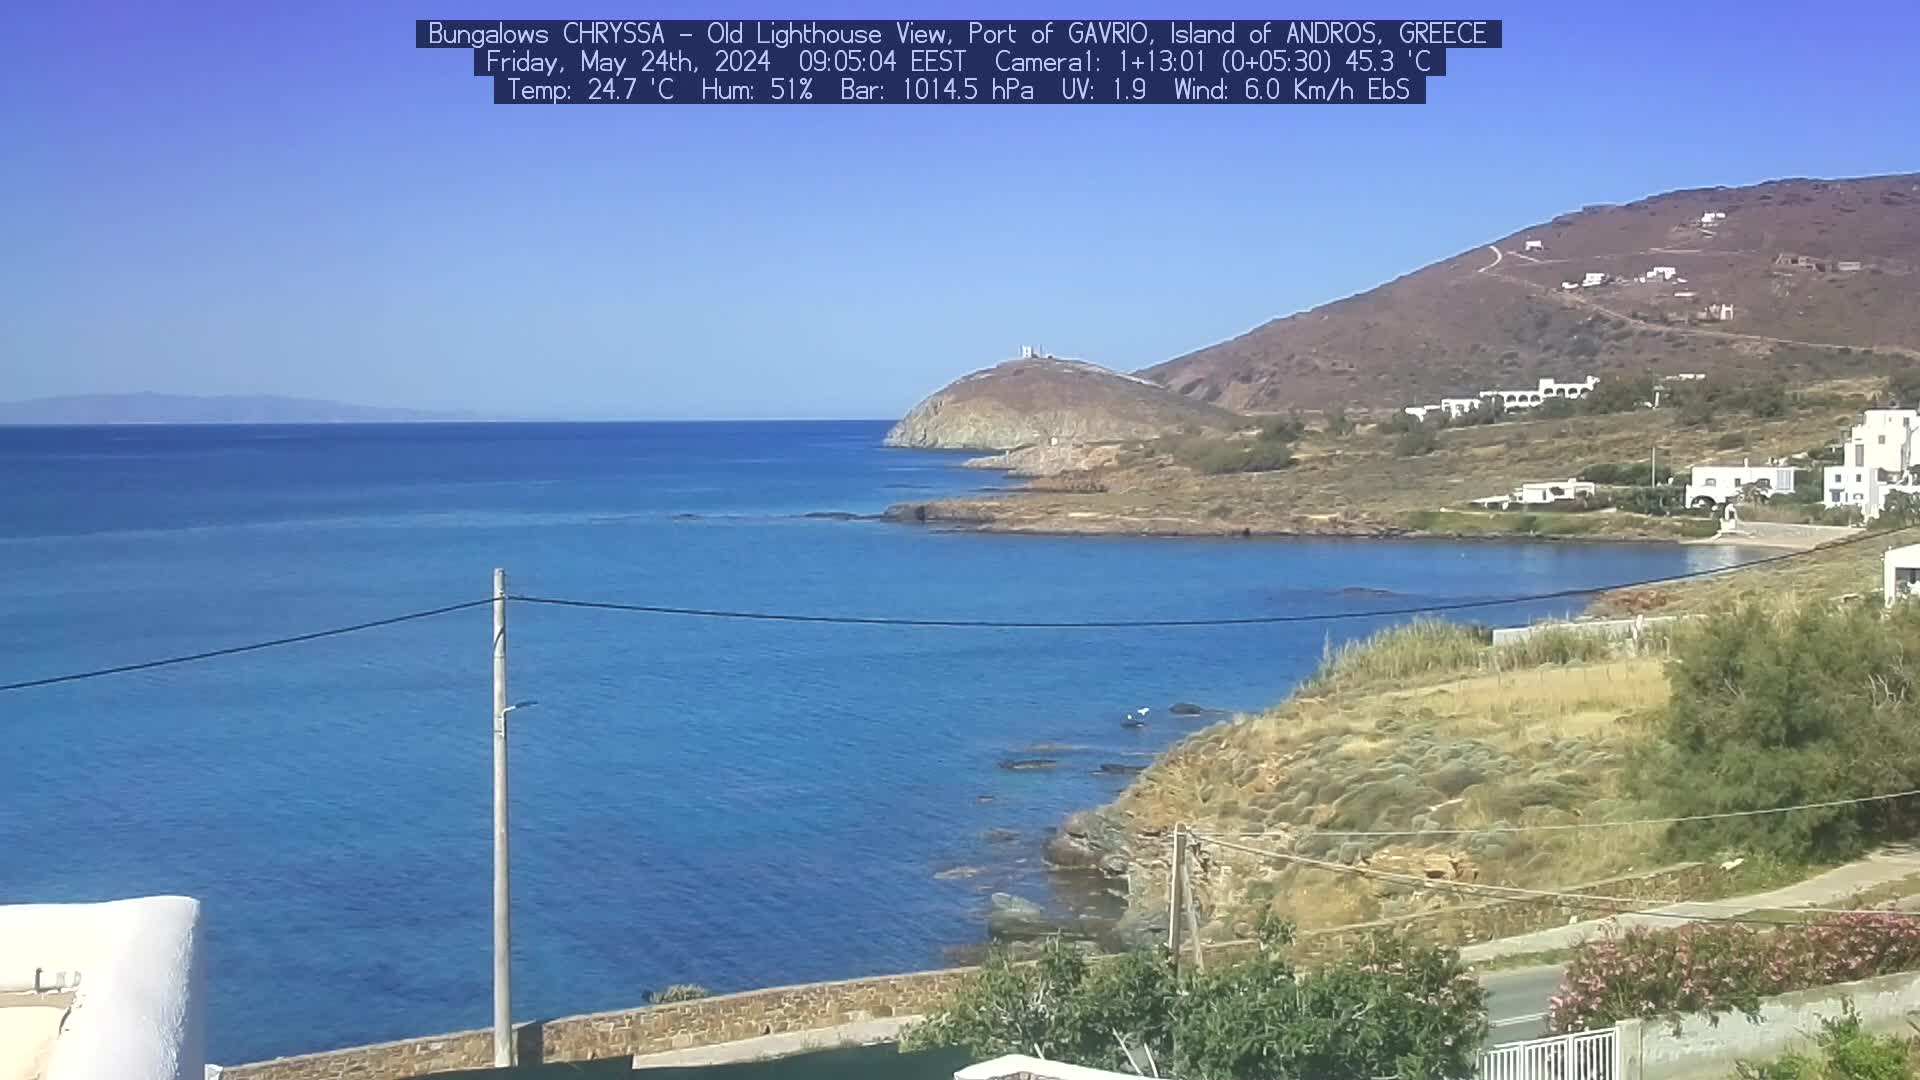 Gavrio (Andros) Wed. 09:05